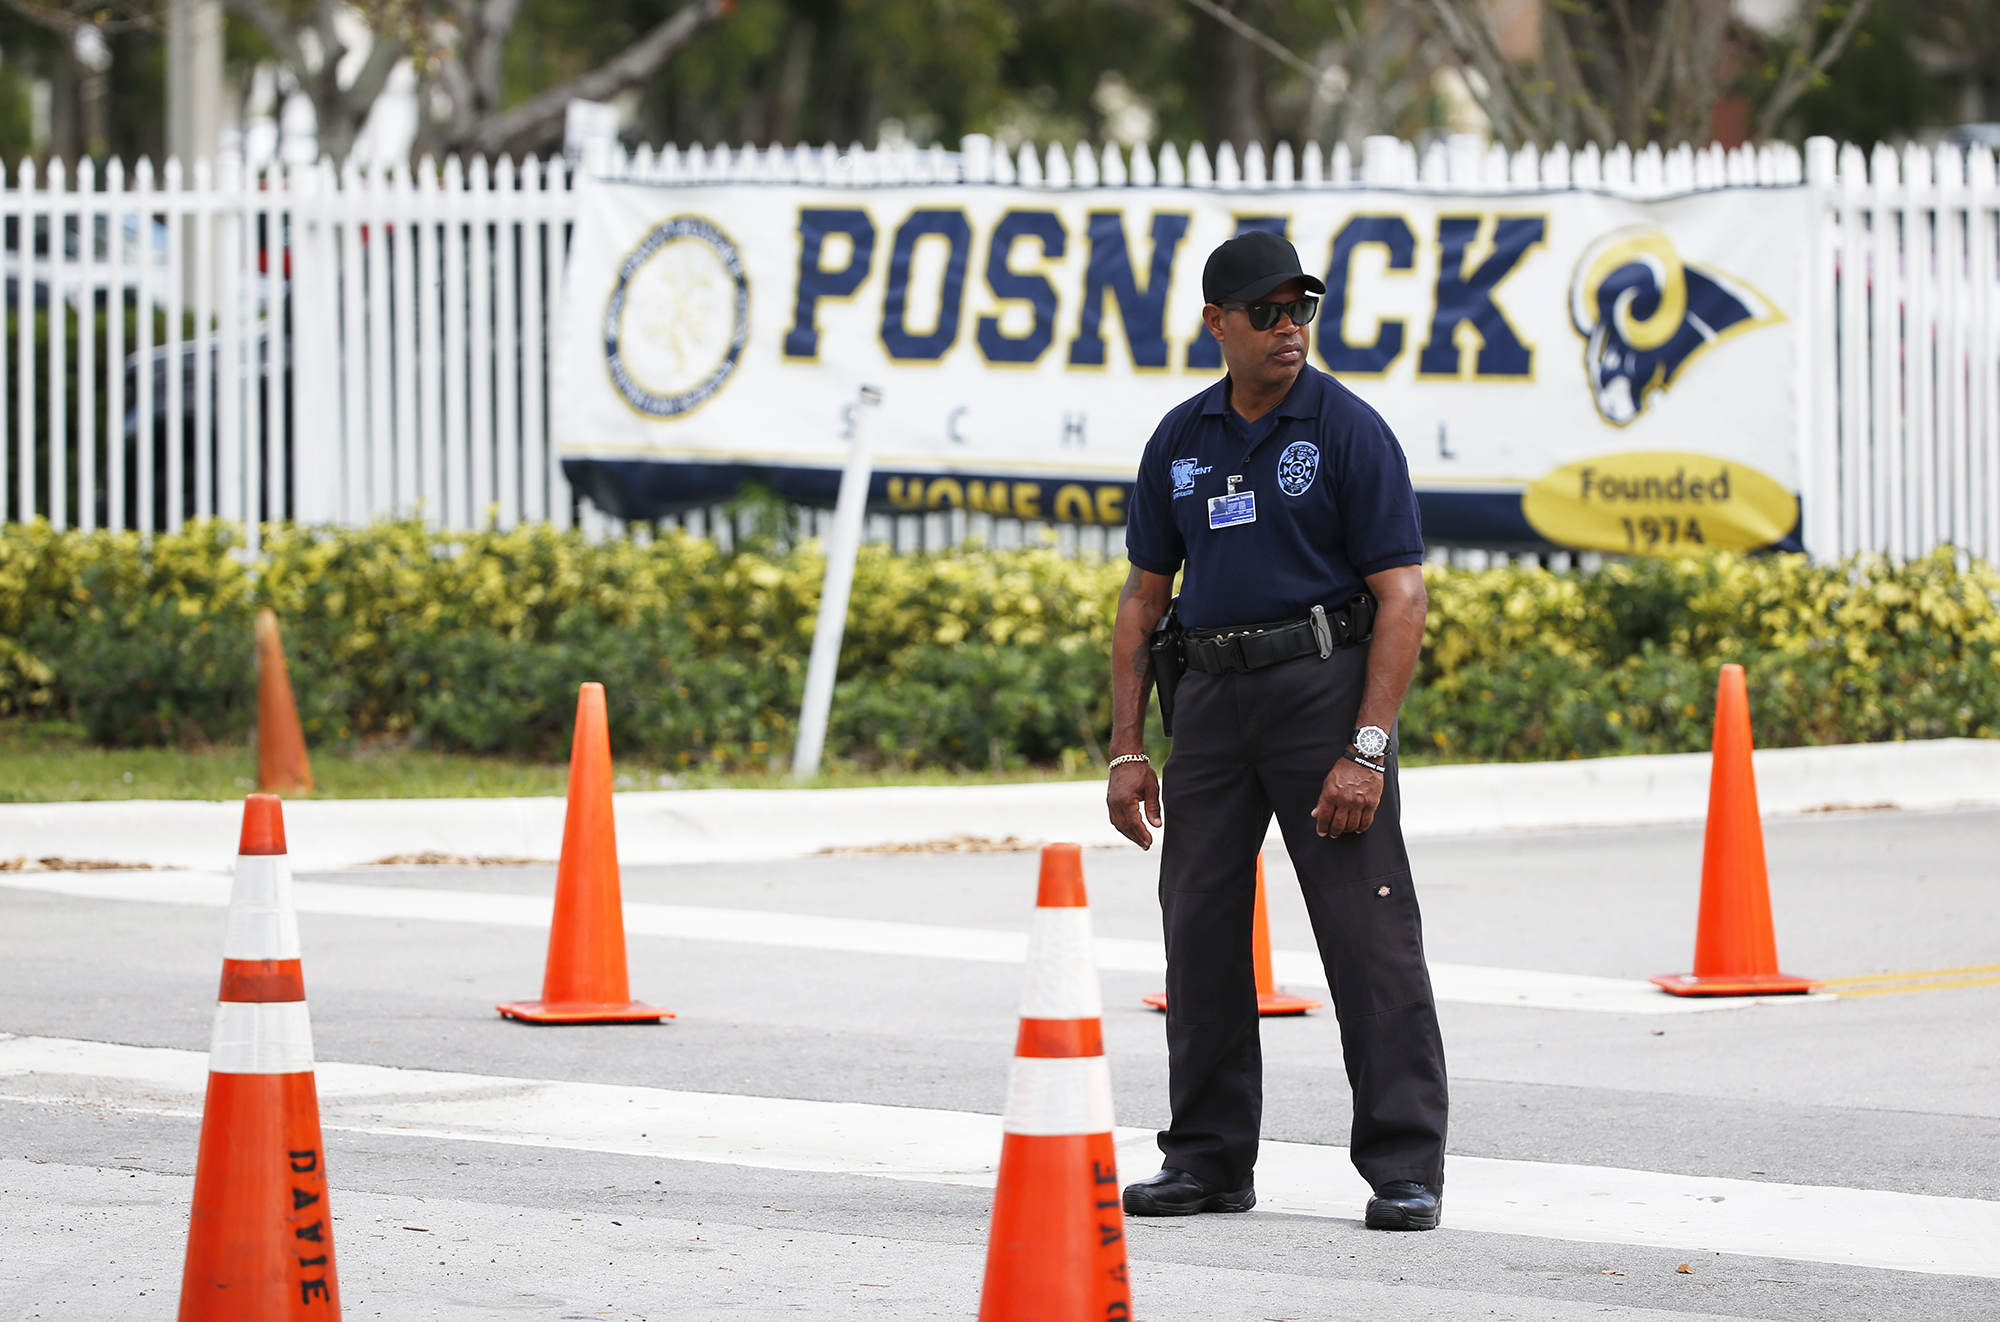 A security guard stands outside the entrance to the David Posnack Jewish Community Center and David Posnack Jewish Day School after people were evacuated because of a bomb threat, on Feb. 27, 2017, in Davie, Fla. (Wilfredo Lee—AP)